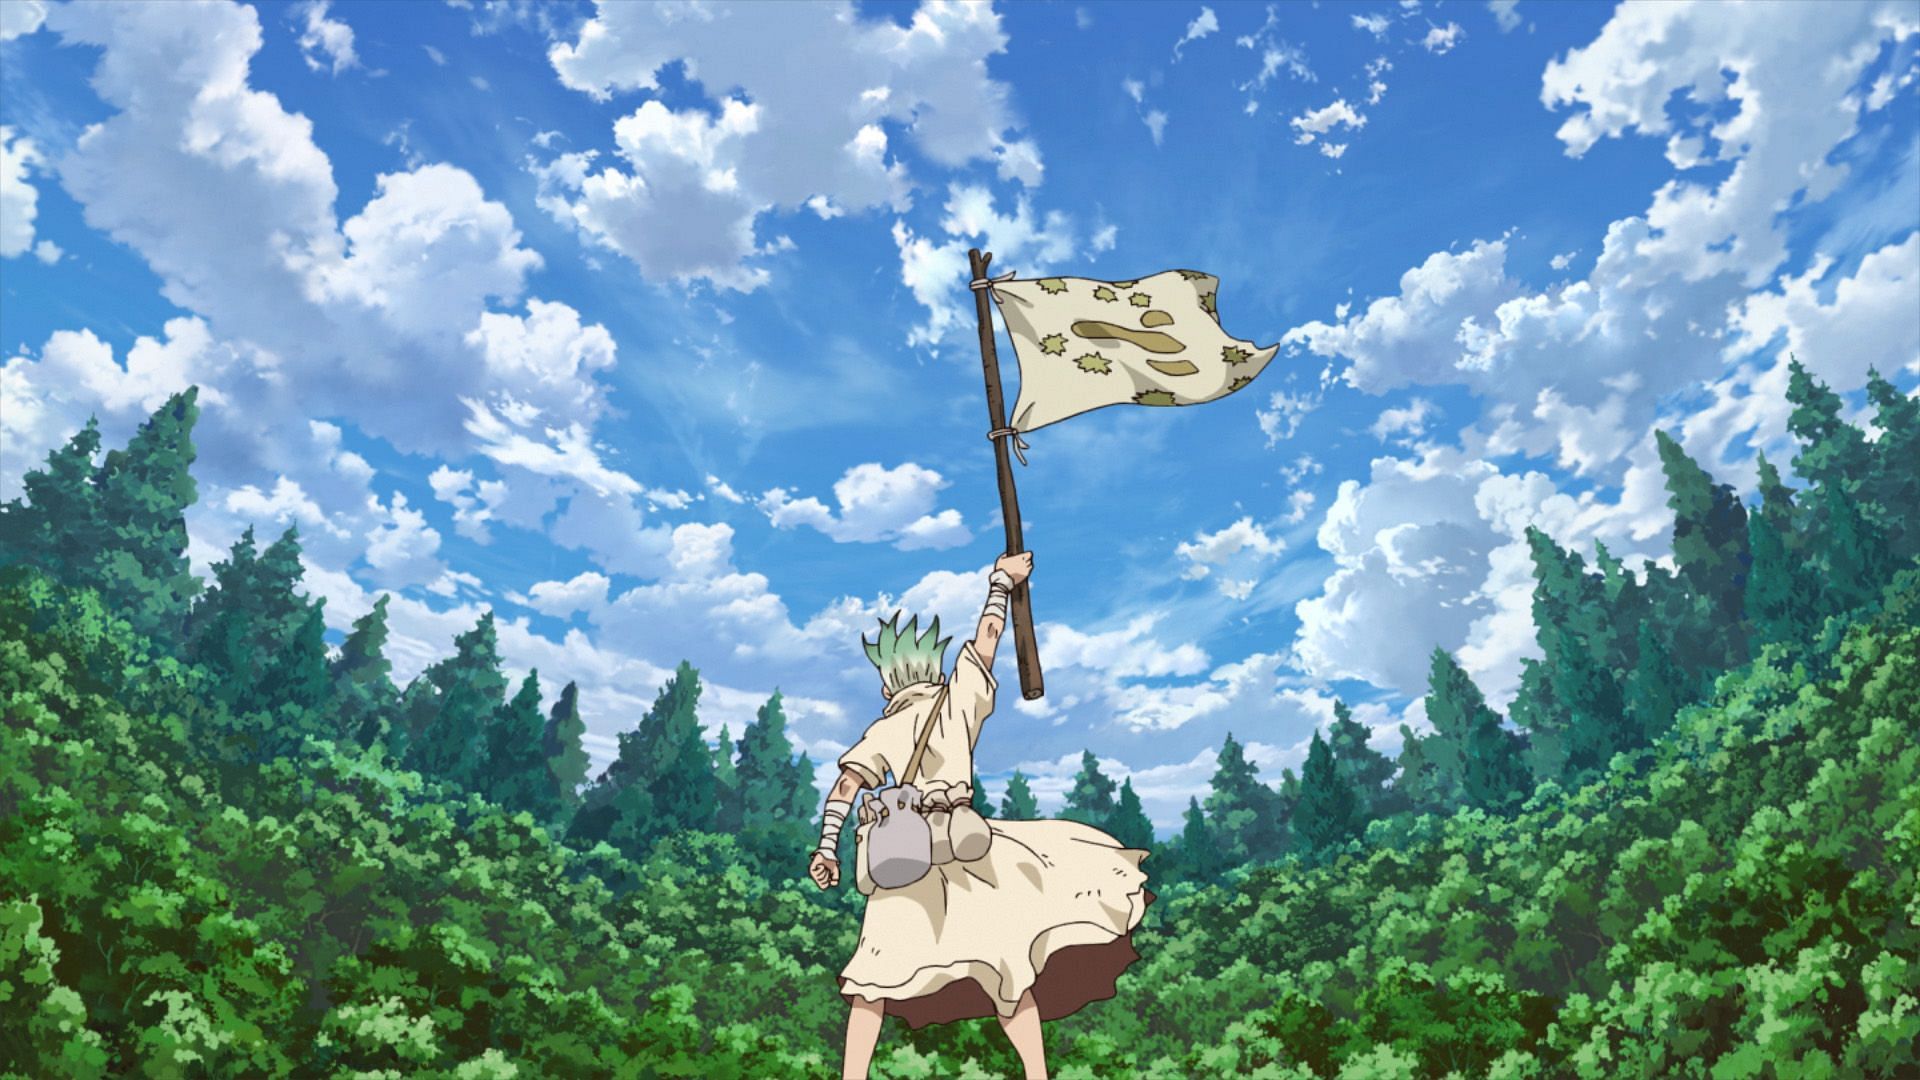 Senku adds Treasure Island to the Kingdom of Science&#039;s forces in Dr. Stone season 3 episode 21 (Image via TMS Entertainment)